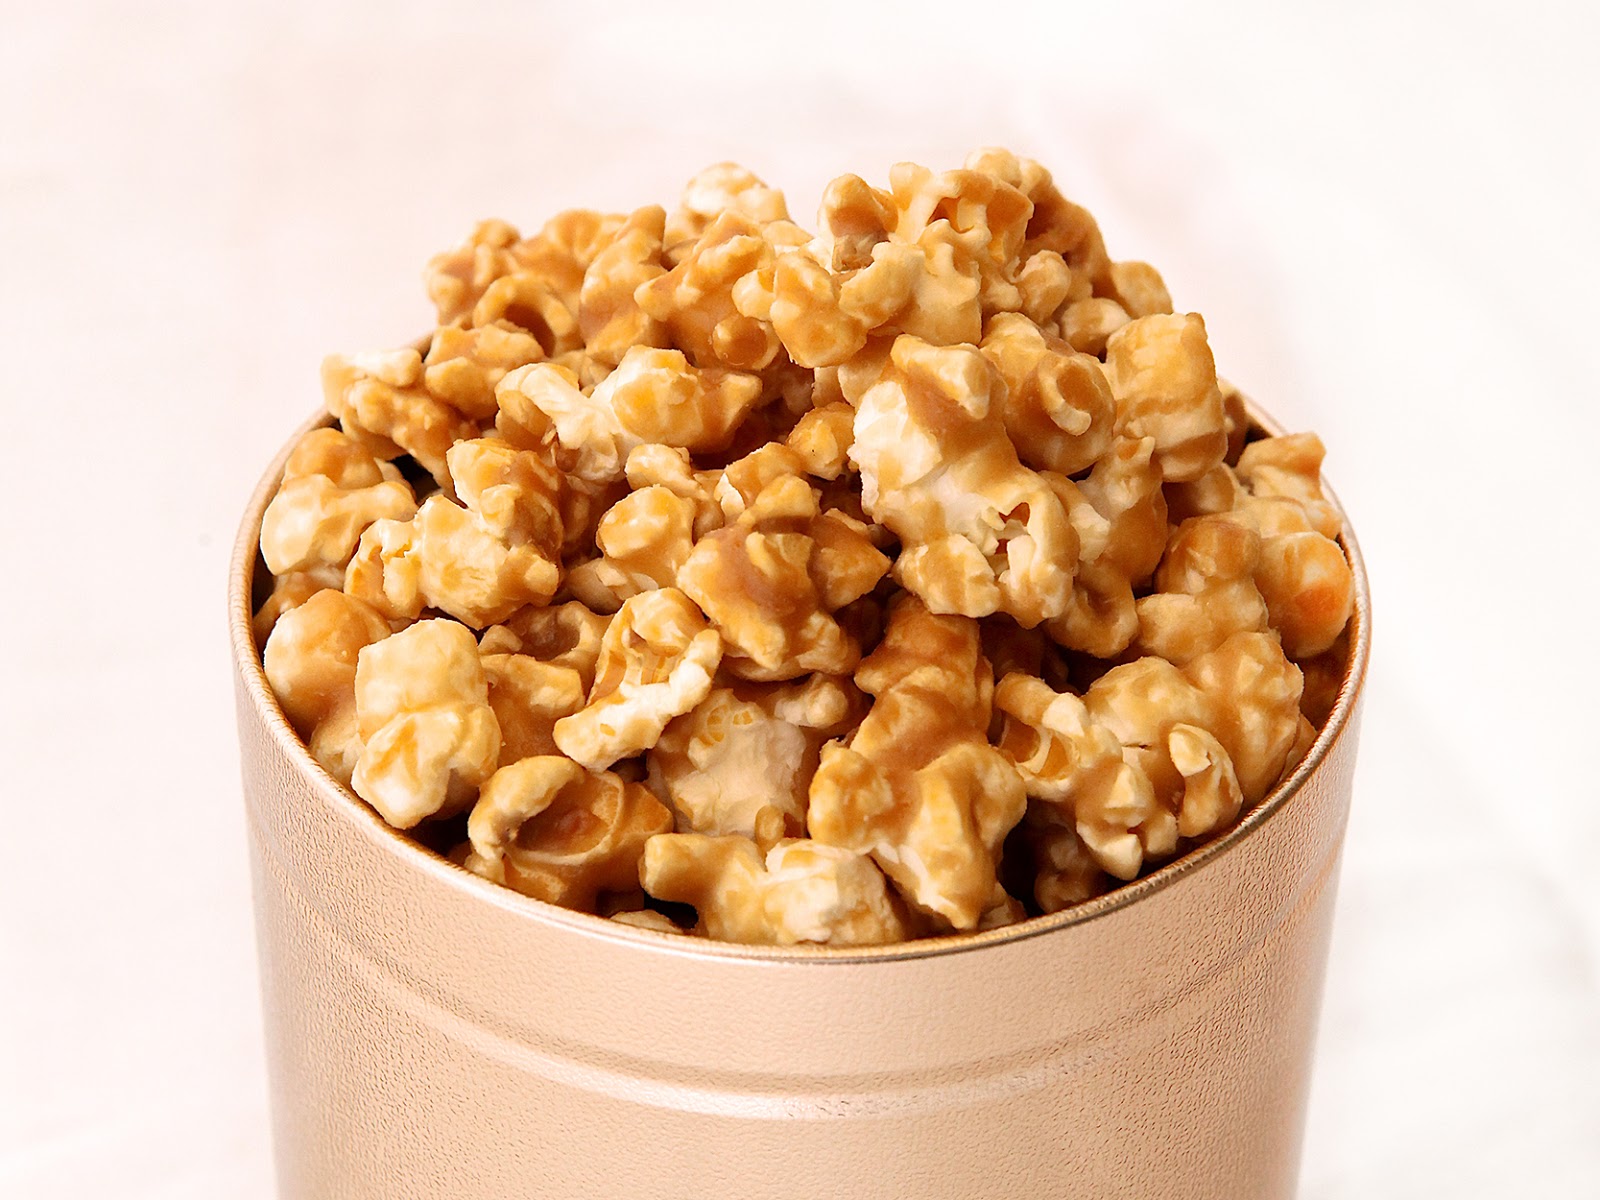 Caramel Popcorn Tin - $12 Freshly popped corn coated in a thick and crunchy...